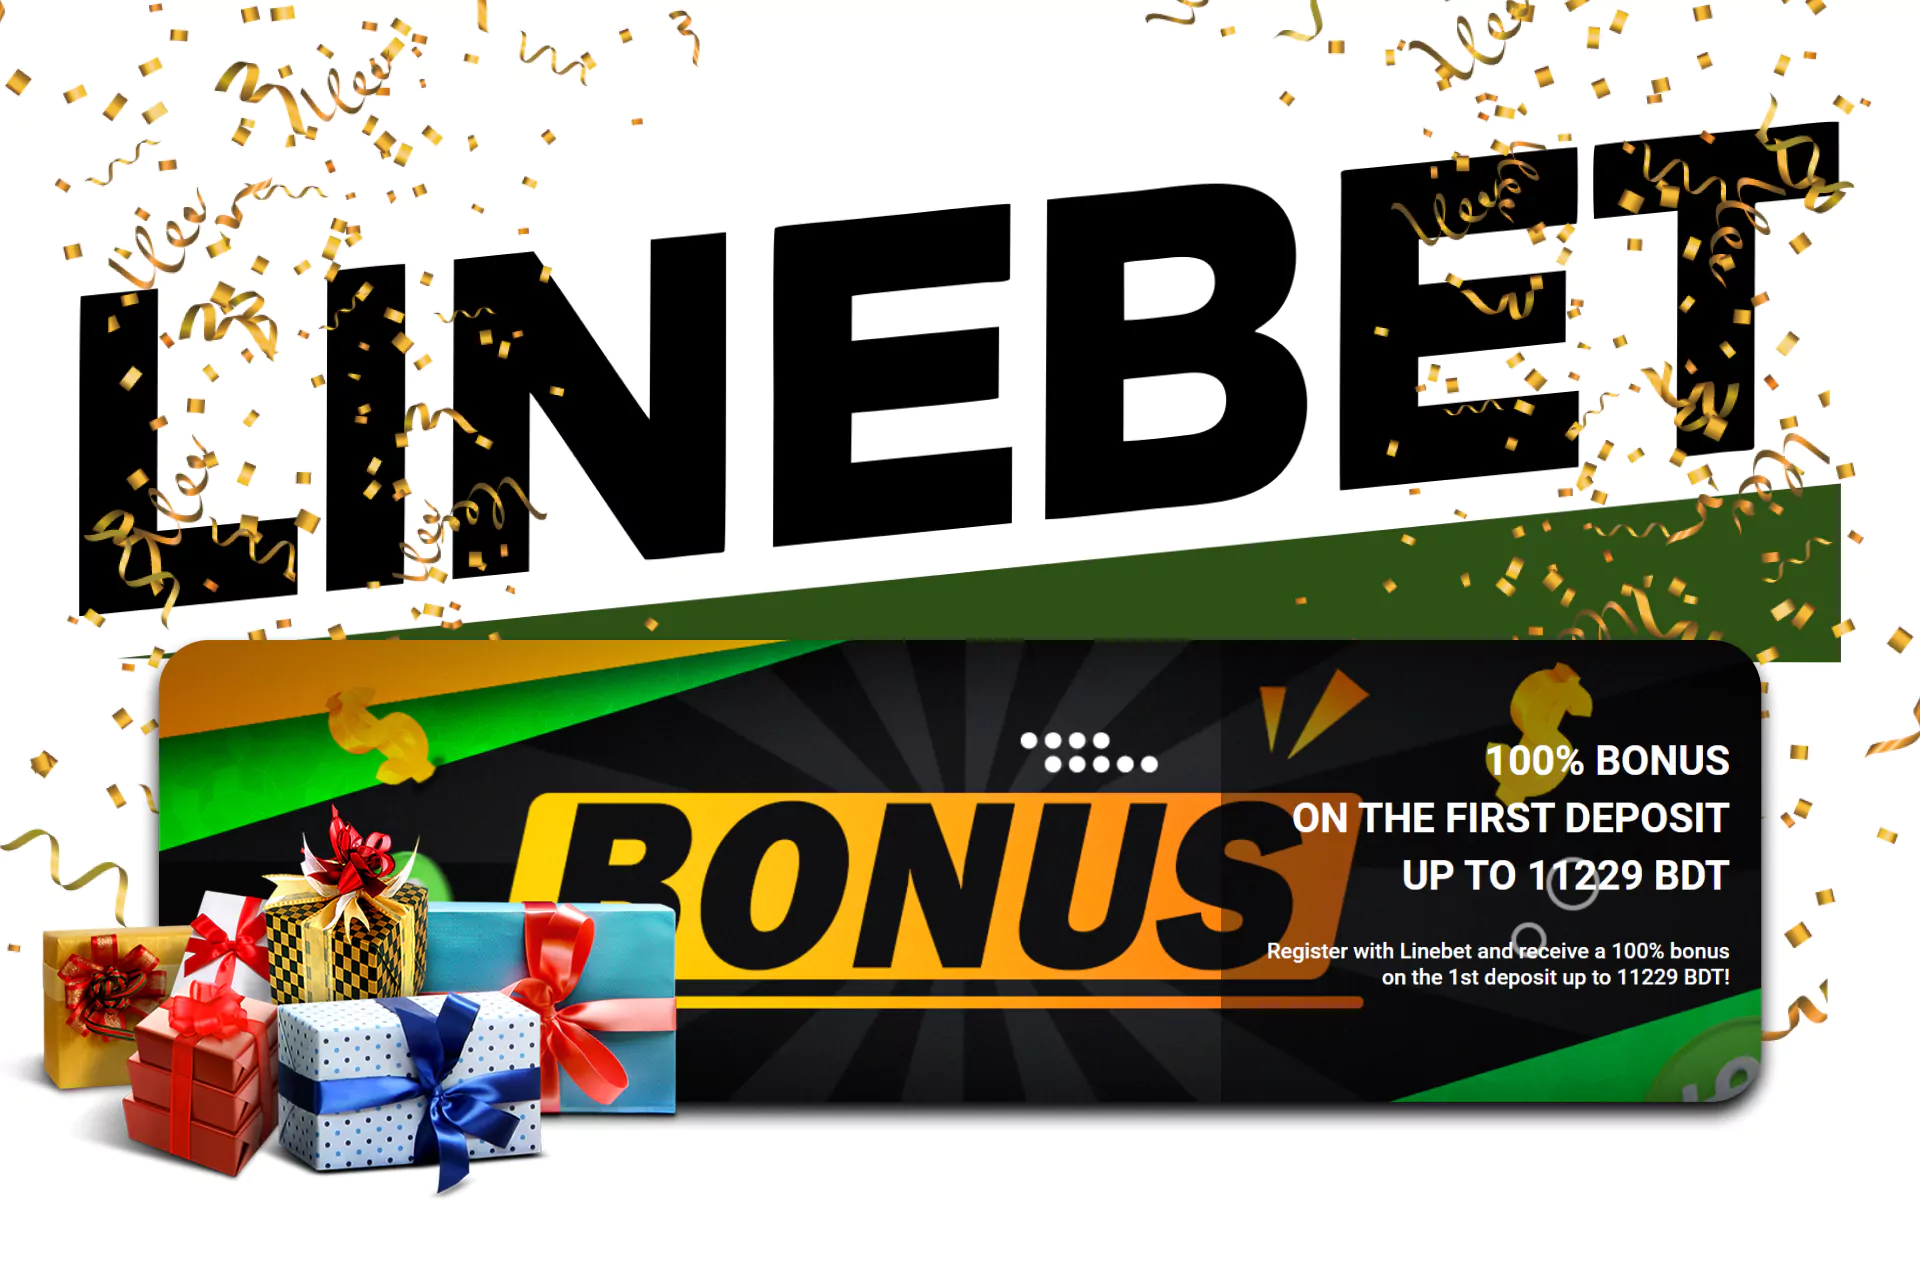 Get bonuses by betting on CS:GO at Linebet.